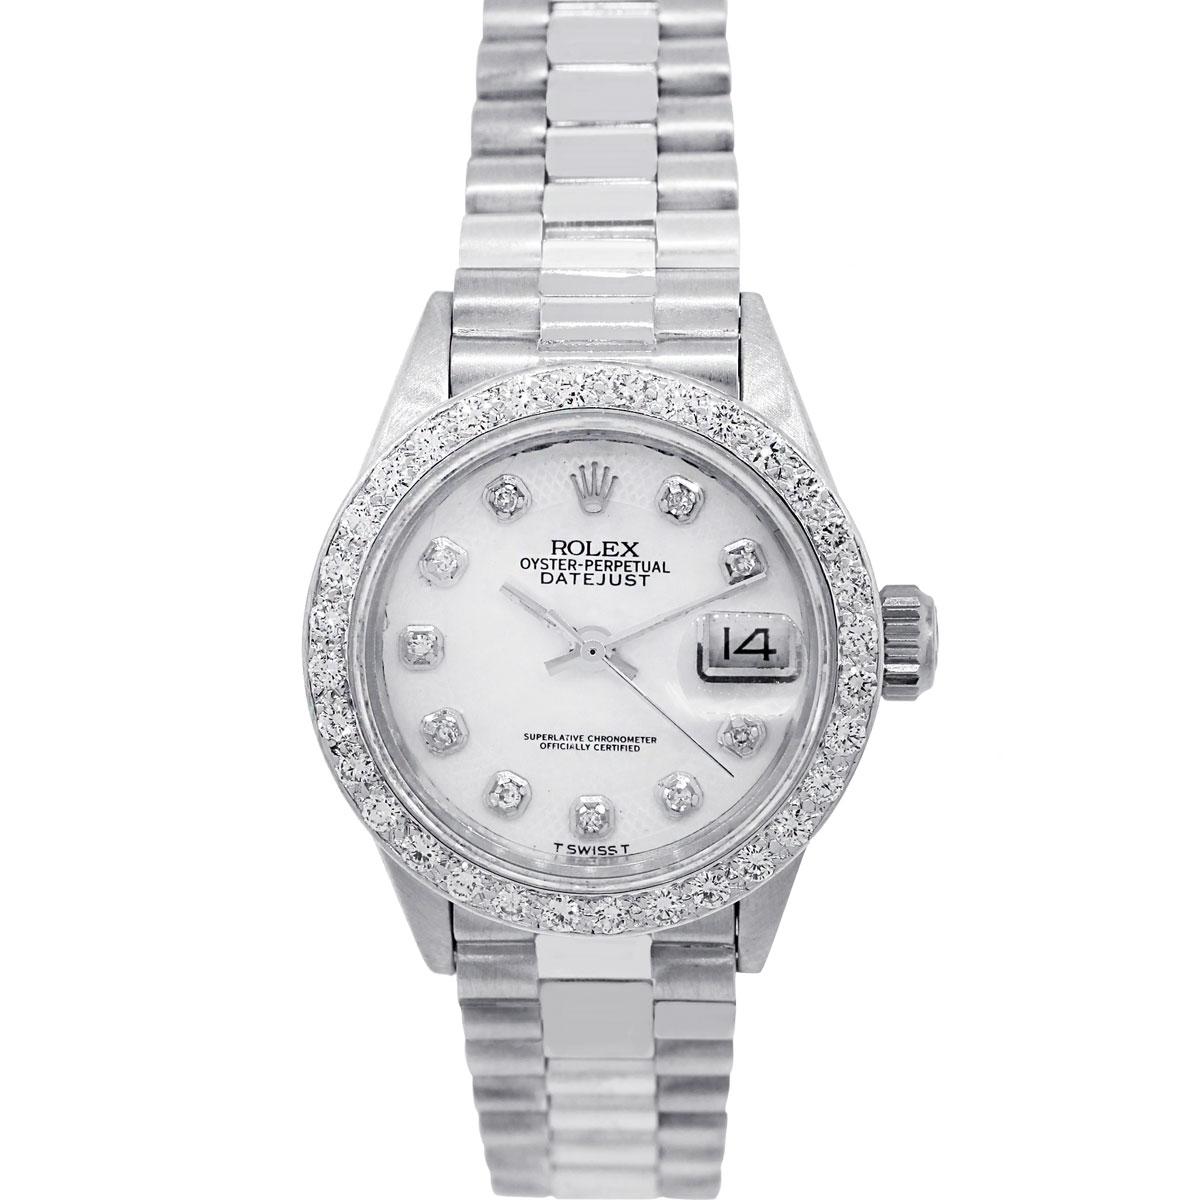 Brand: Rolex
MPN	: 6917
Model: Presidential
Case Material: 18k white gold
Case Diameter: 26mm
Crystal: Scratch resistant sapphire
Bezel: Aftermarket Diamond Bezel
Dial: Aftermarket Mother of Pearl dial with guilloche border, Diamond hour markers and